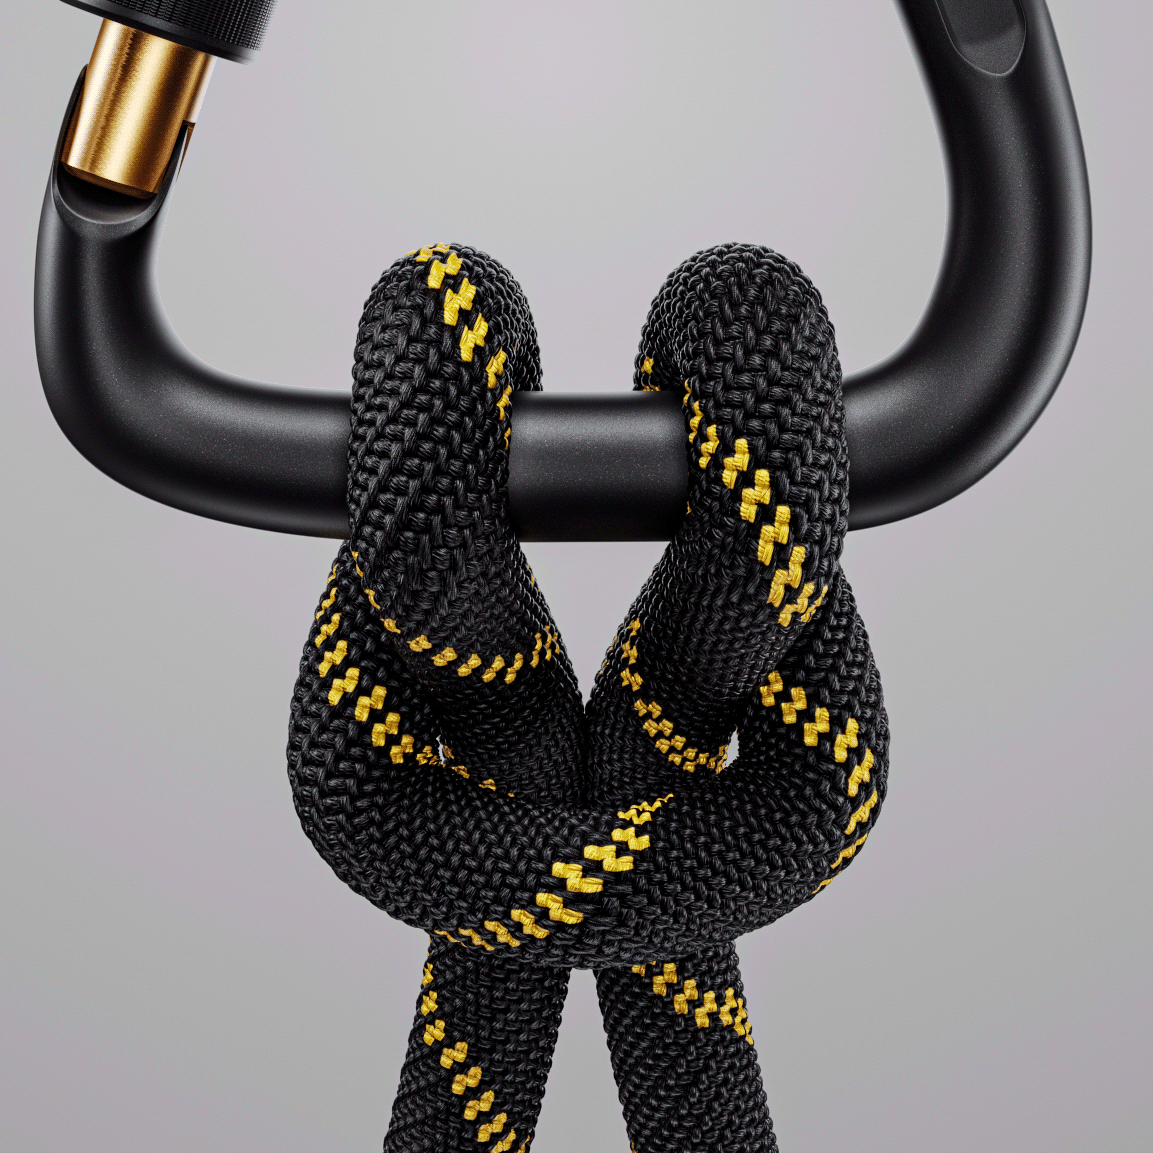 carabiner climbing adventure Render product visualization 3D 3ds max